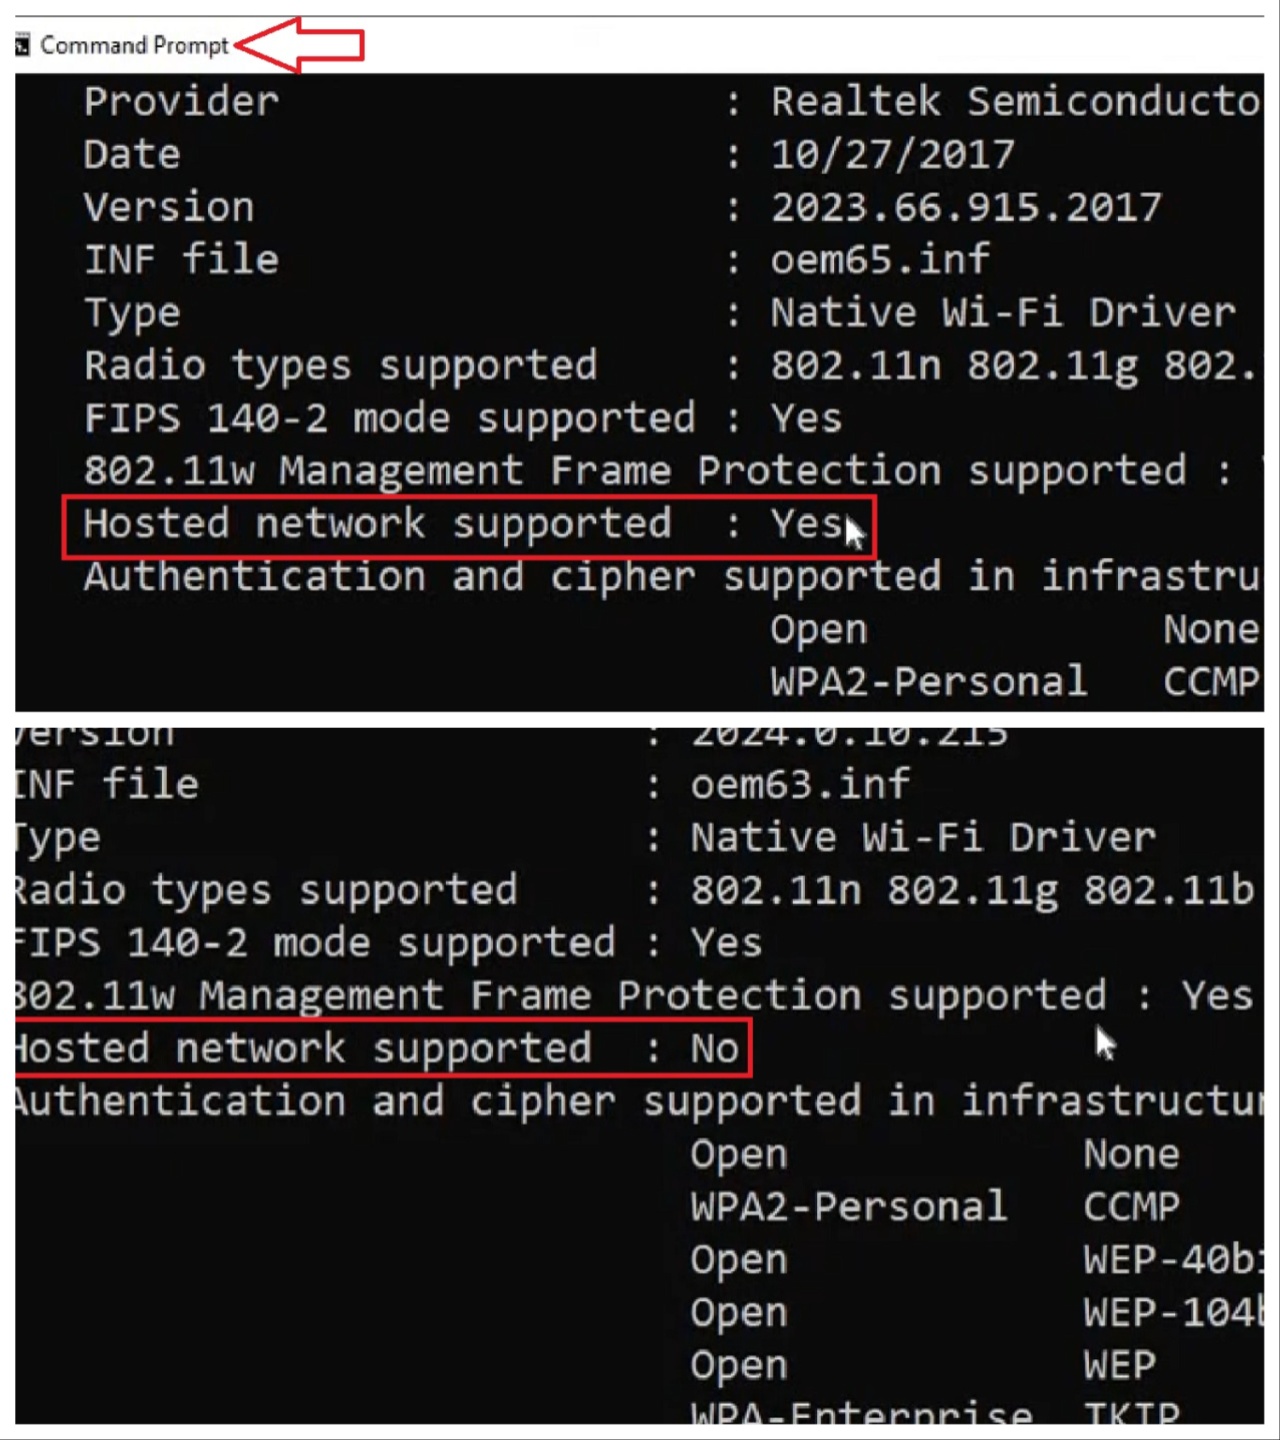 Hosted network supported in the Command Prompt is saying Yes